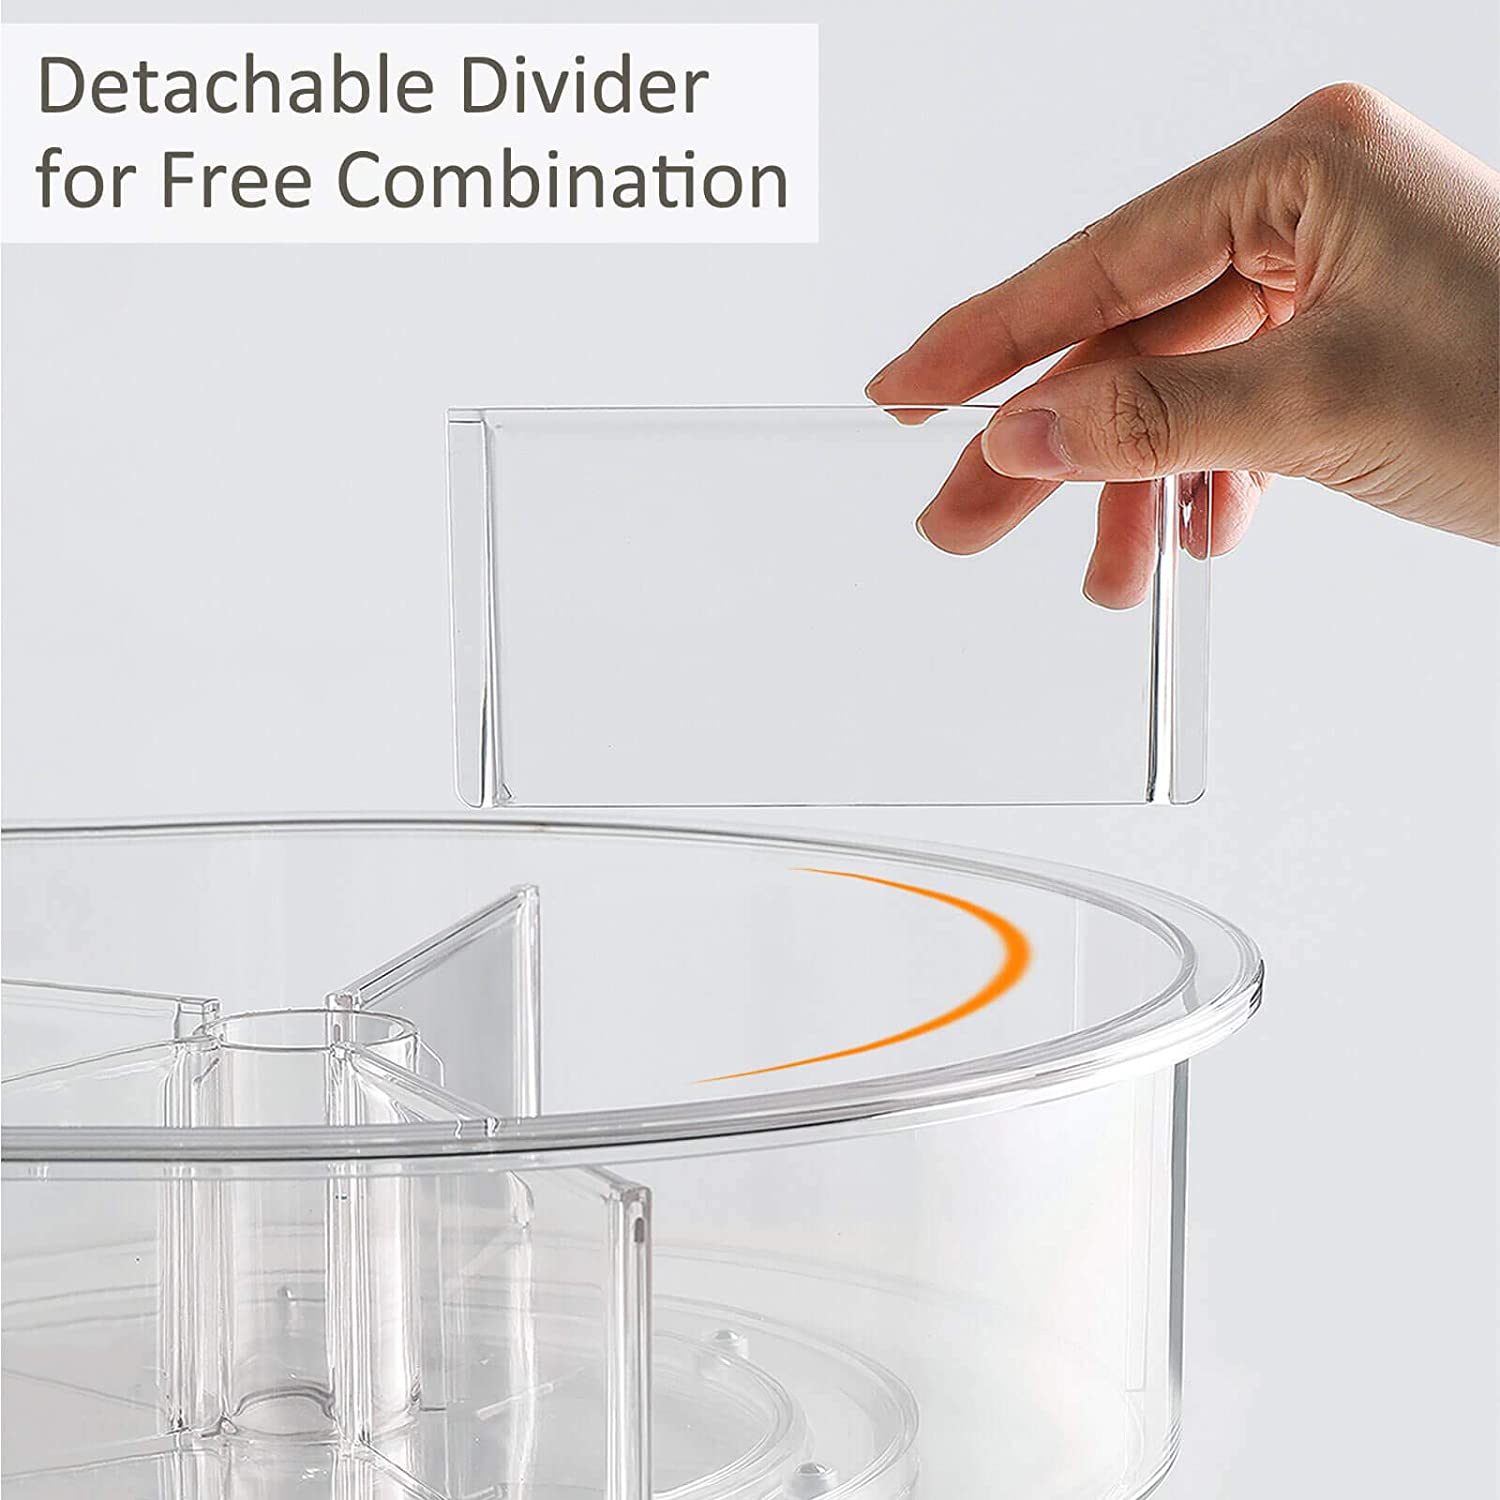 5 Removable dividers